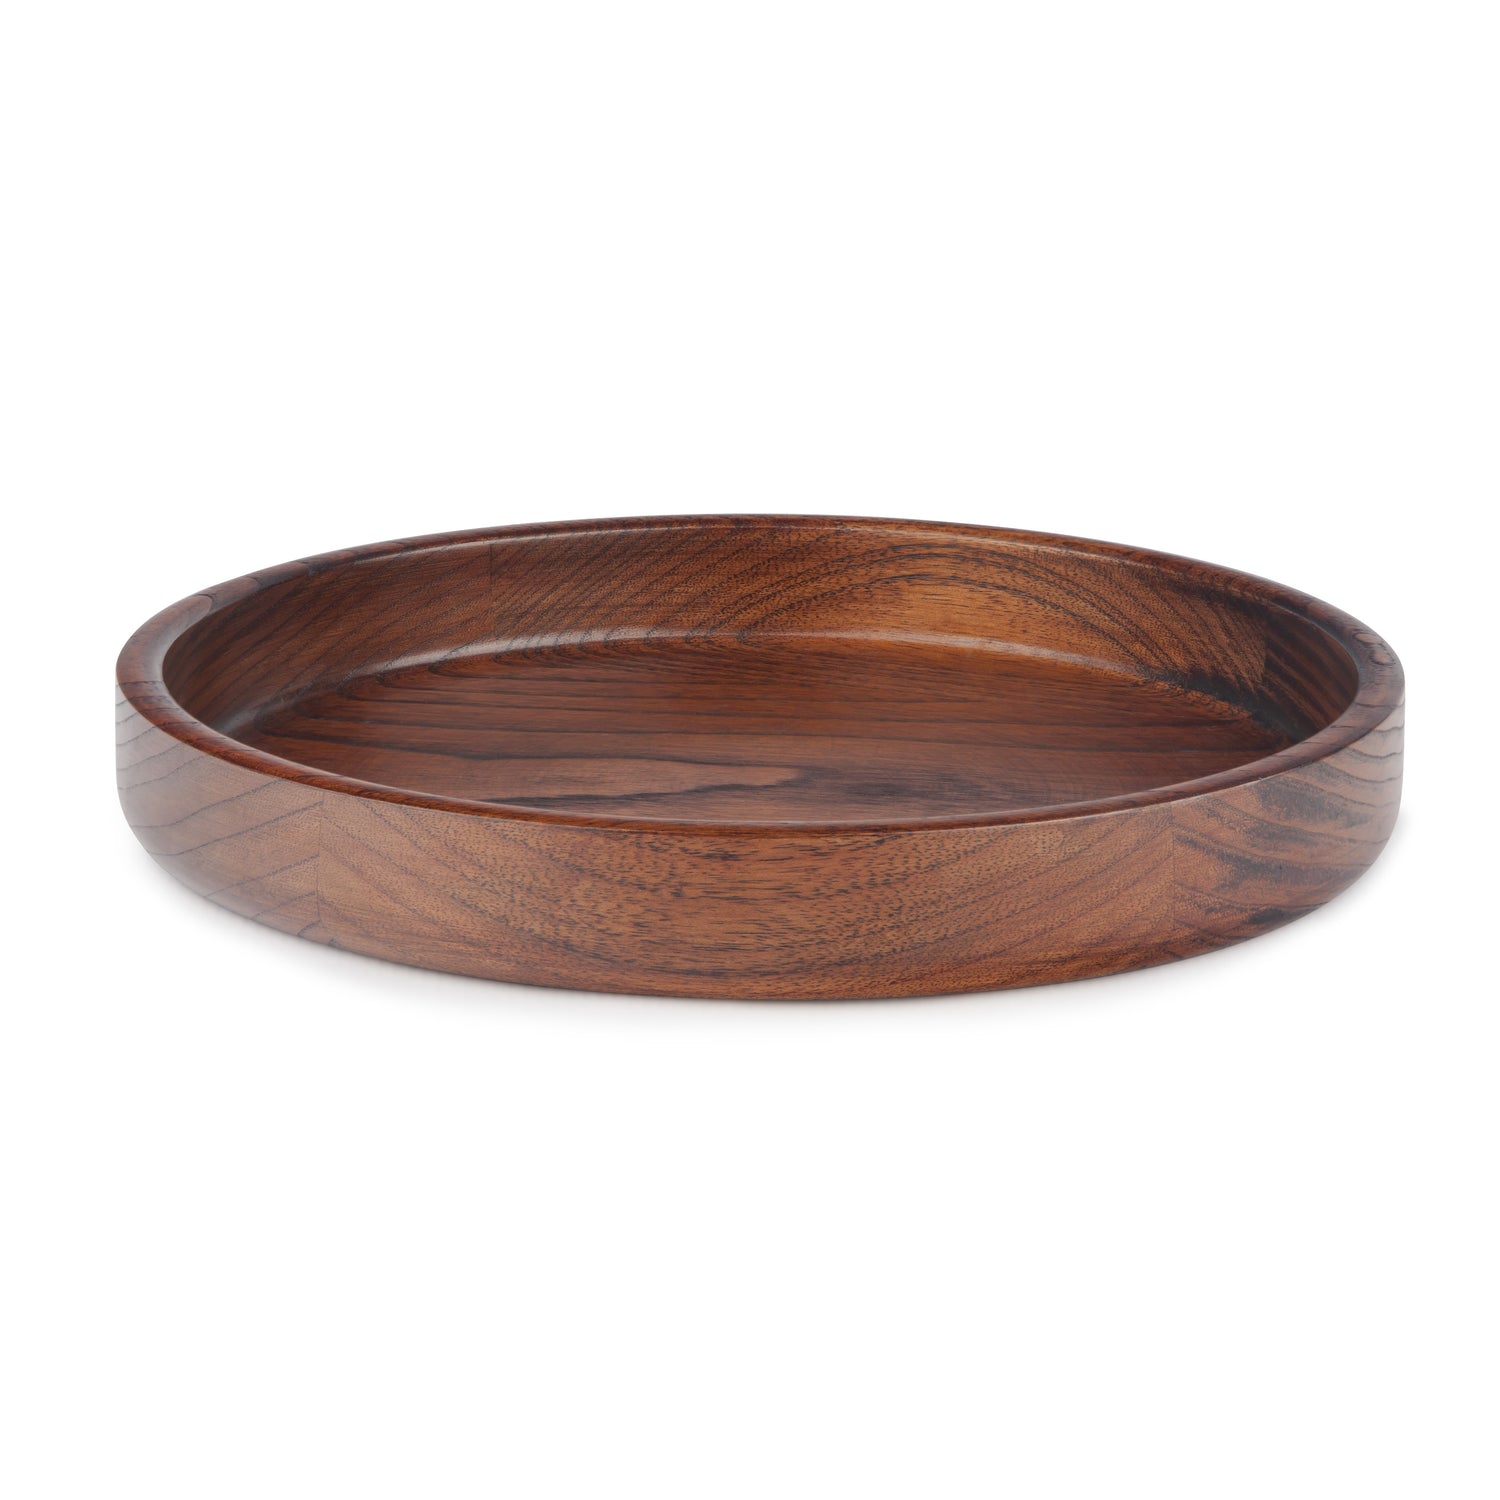 Solid Wood Serving Tray - 27 cm